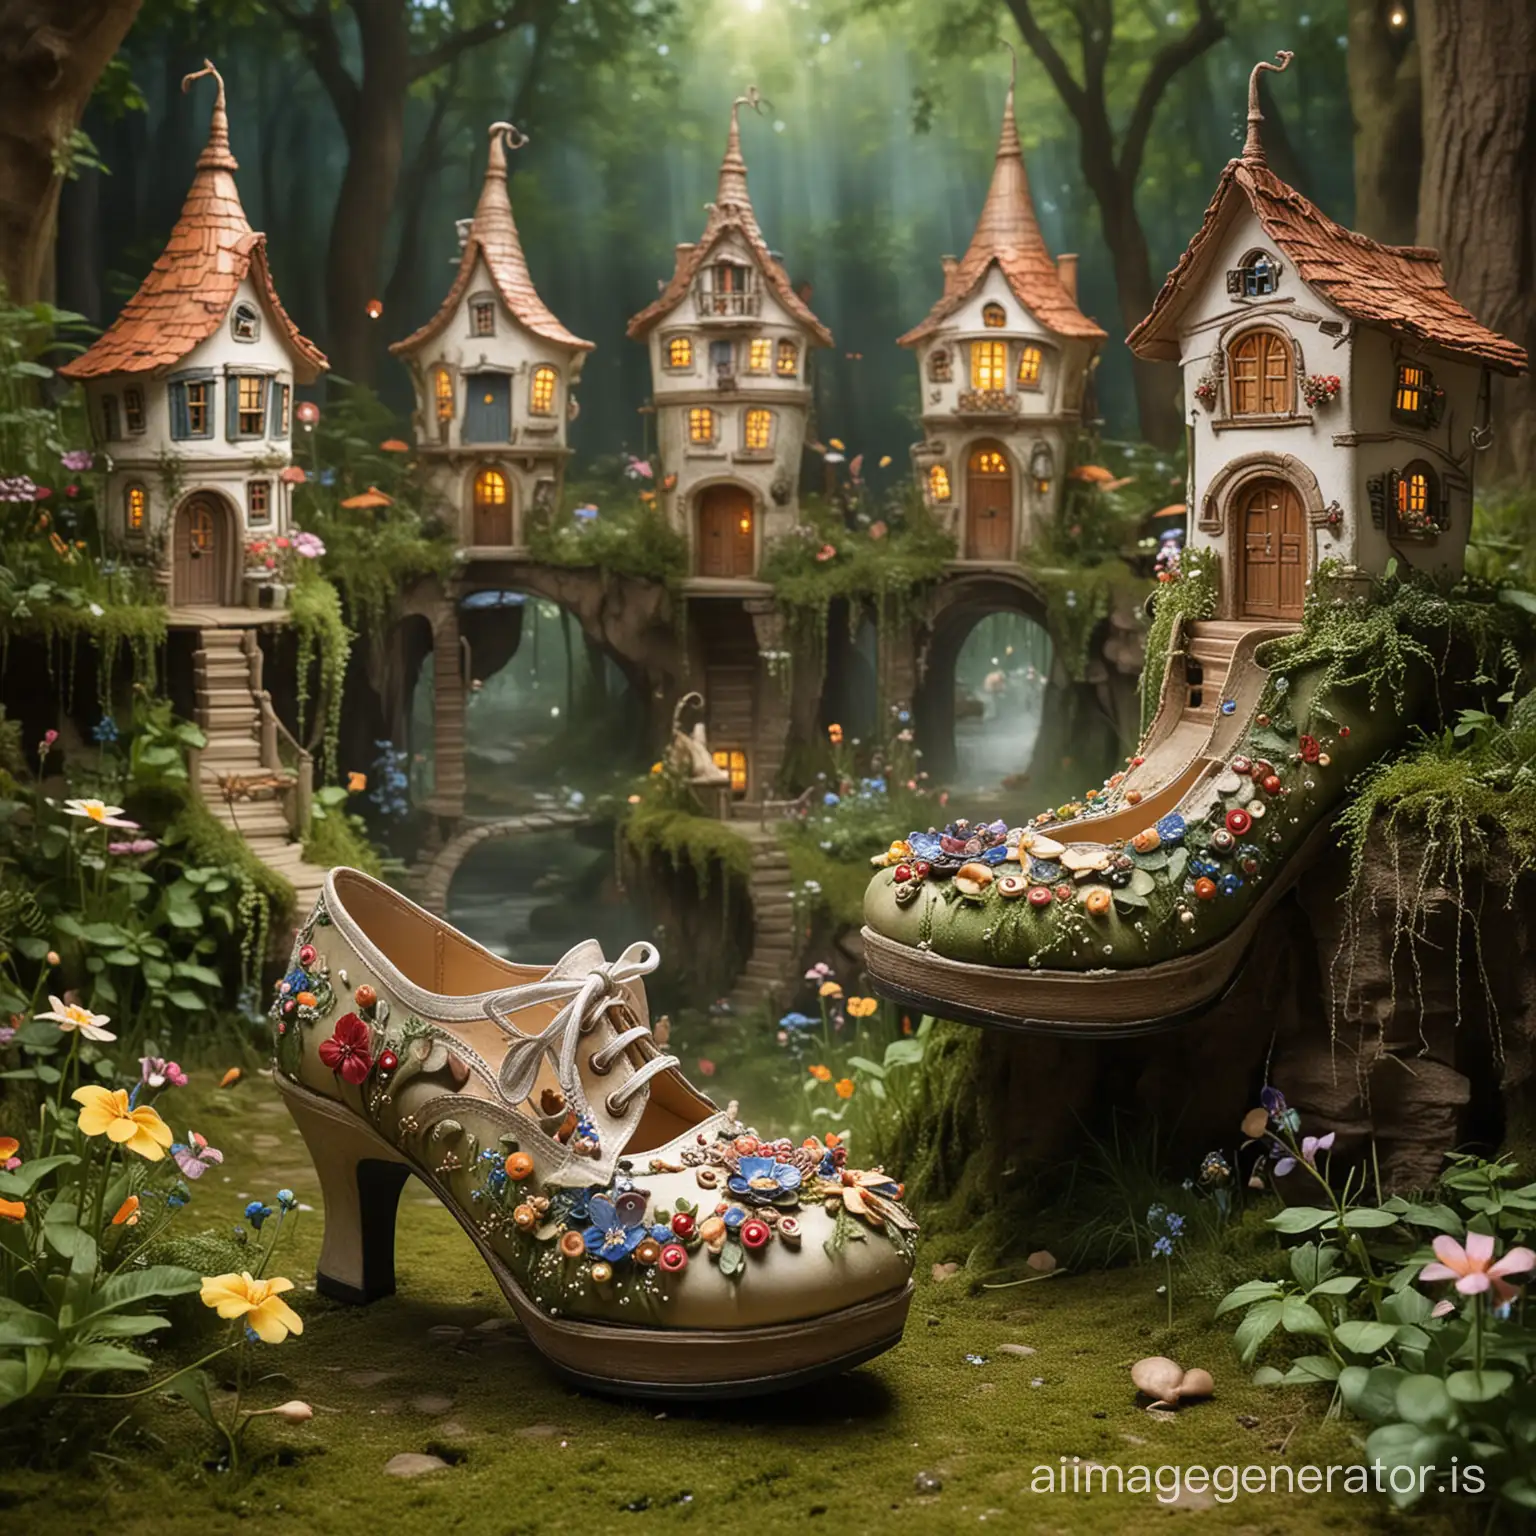 Enchanted-Shoes-Lilliputian-Homes-in-a-Fairy-Realm